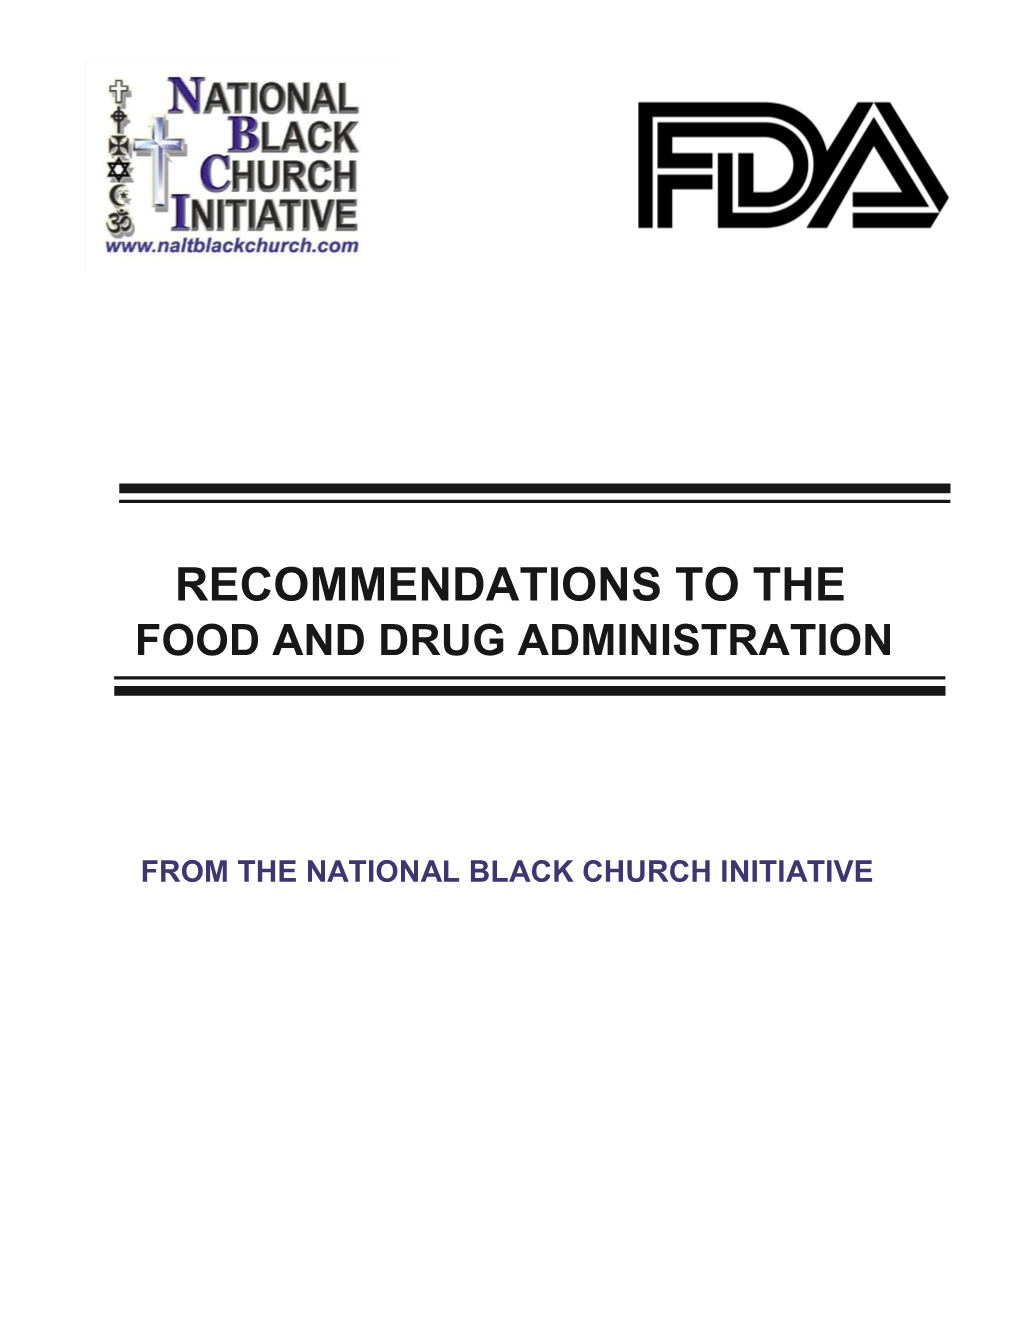 Recommendations to the Food and Drug Administration